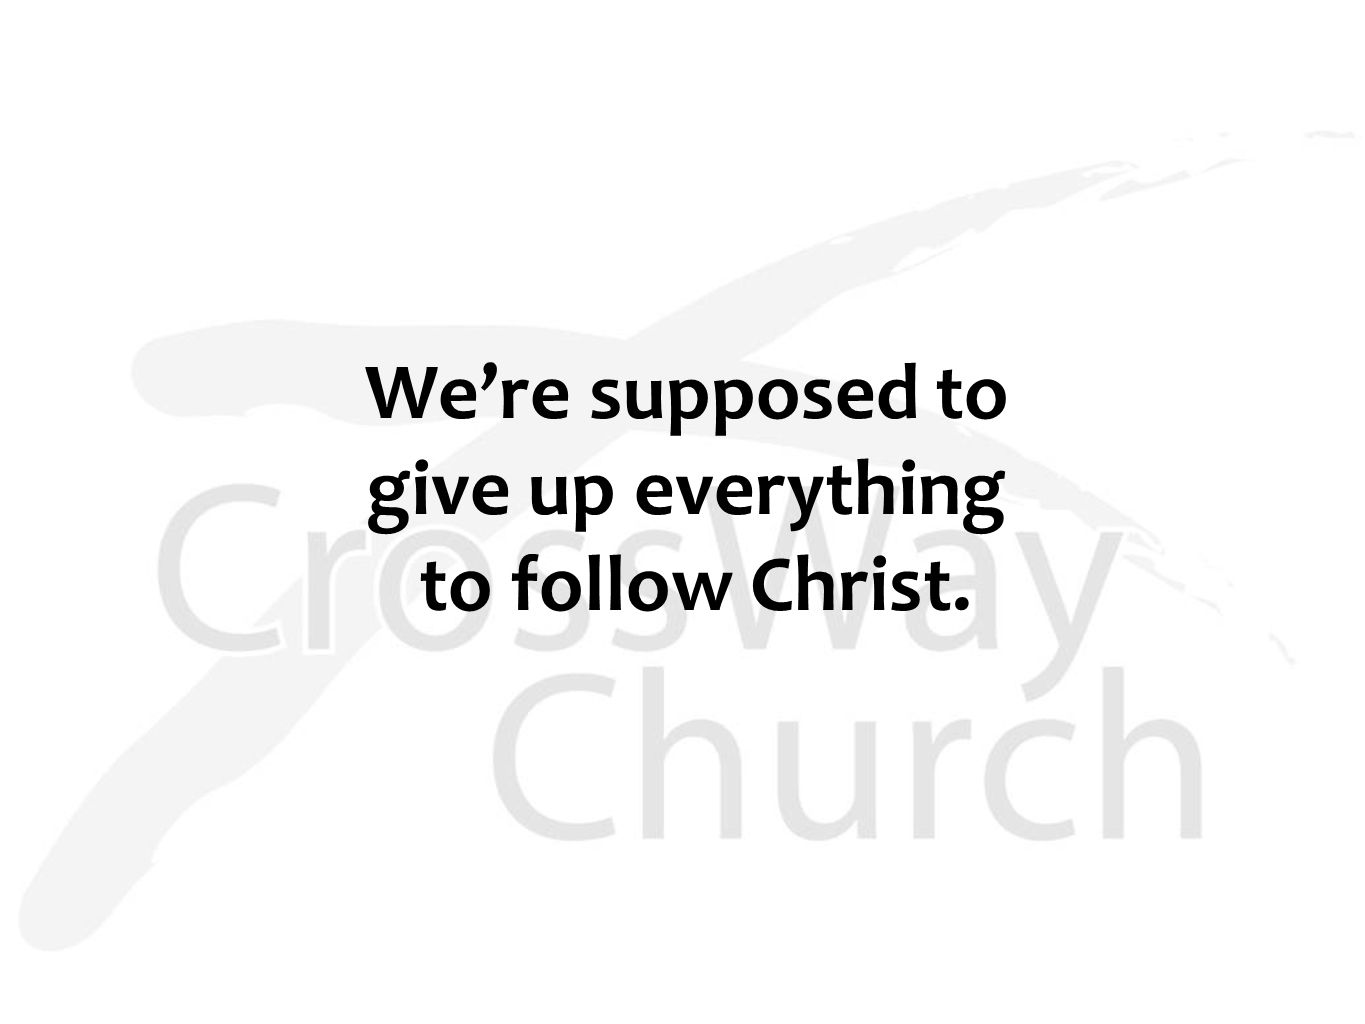 We’re supposed to give up everything to follow Christ.